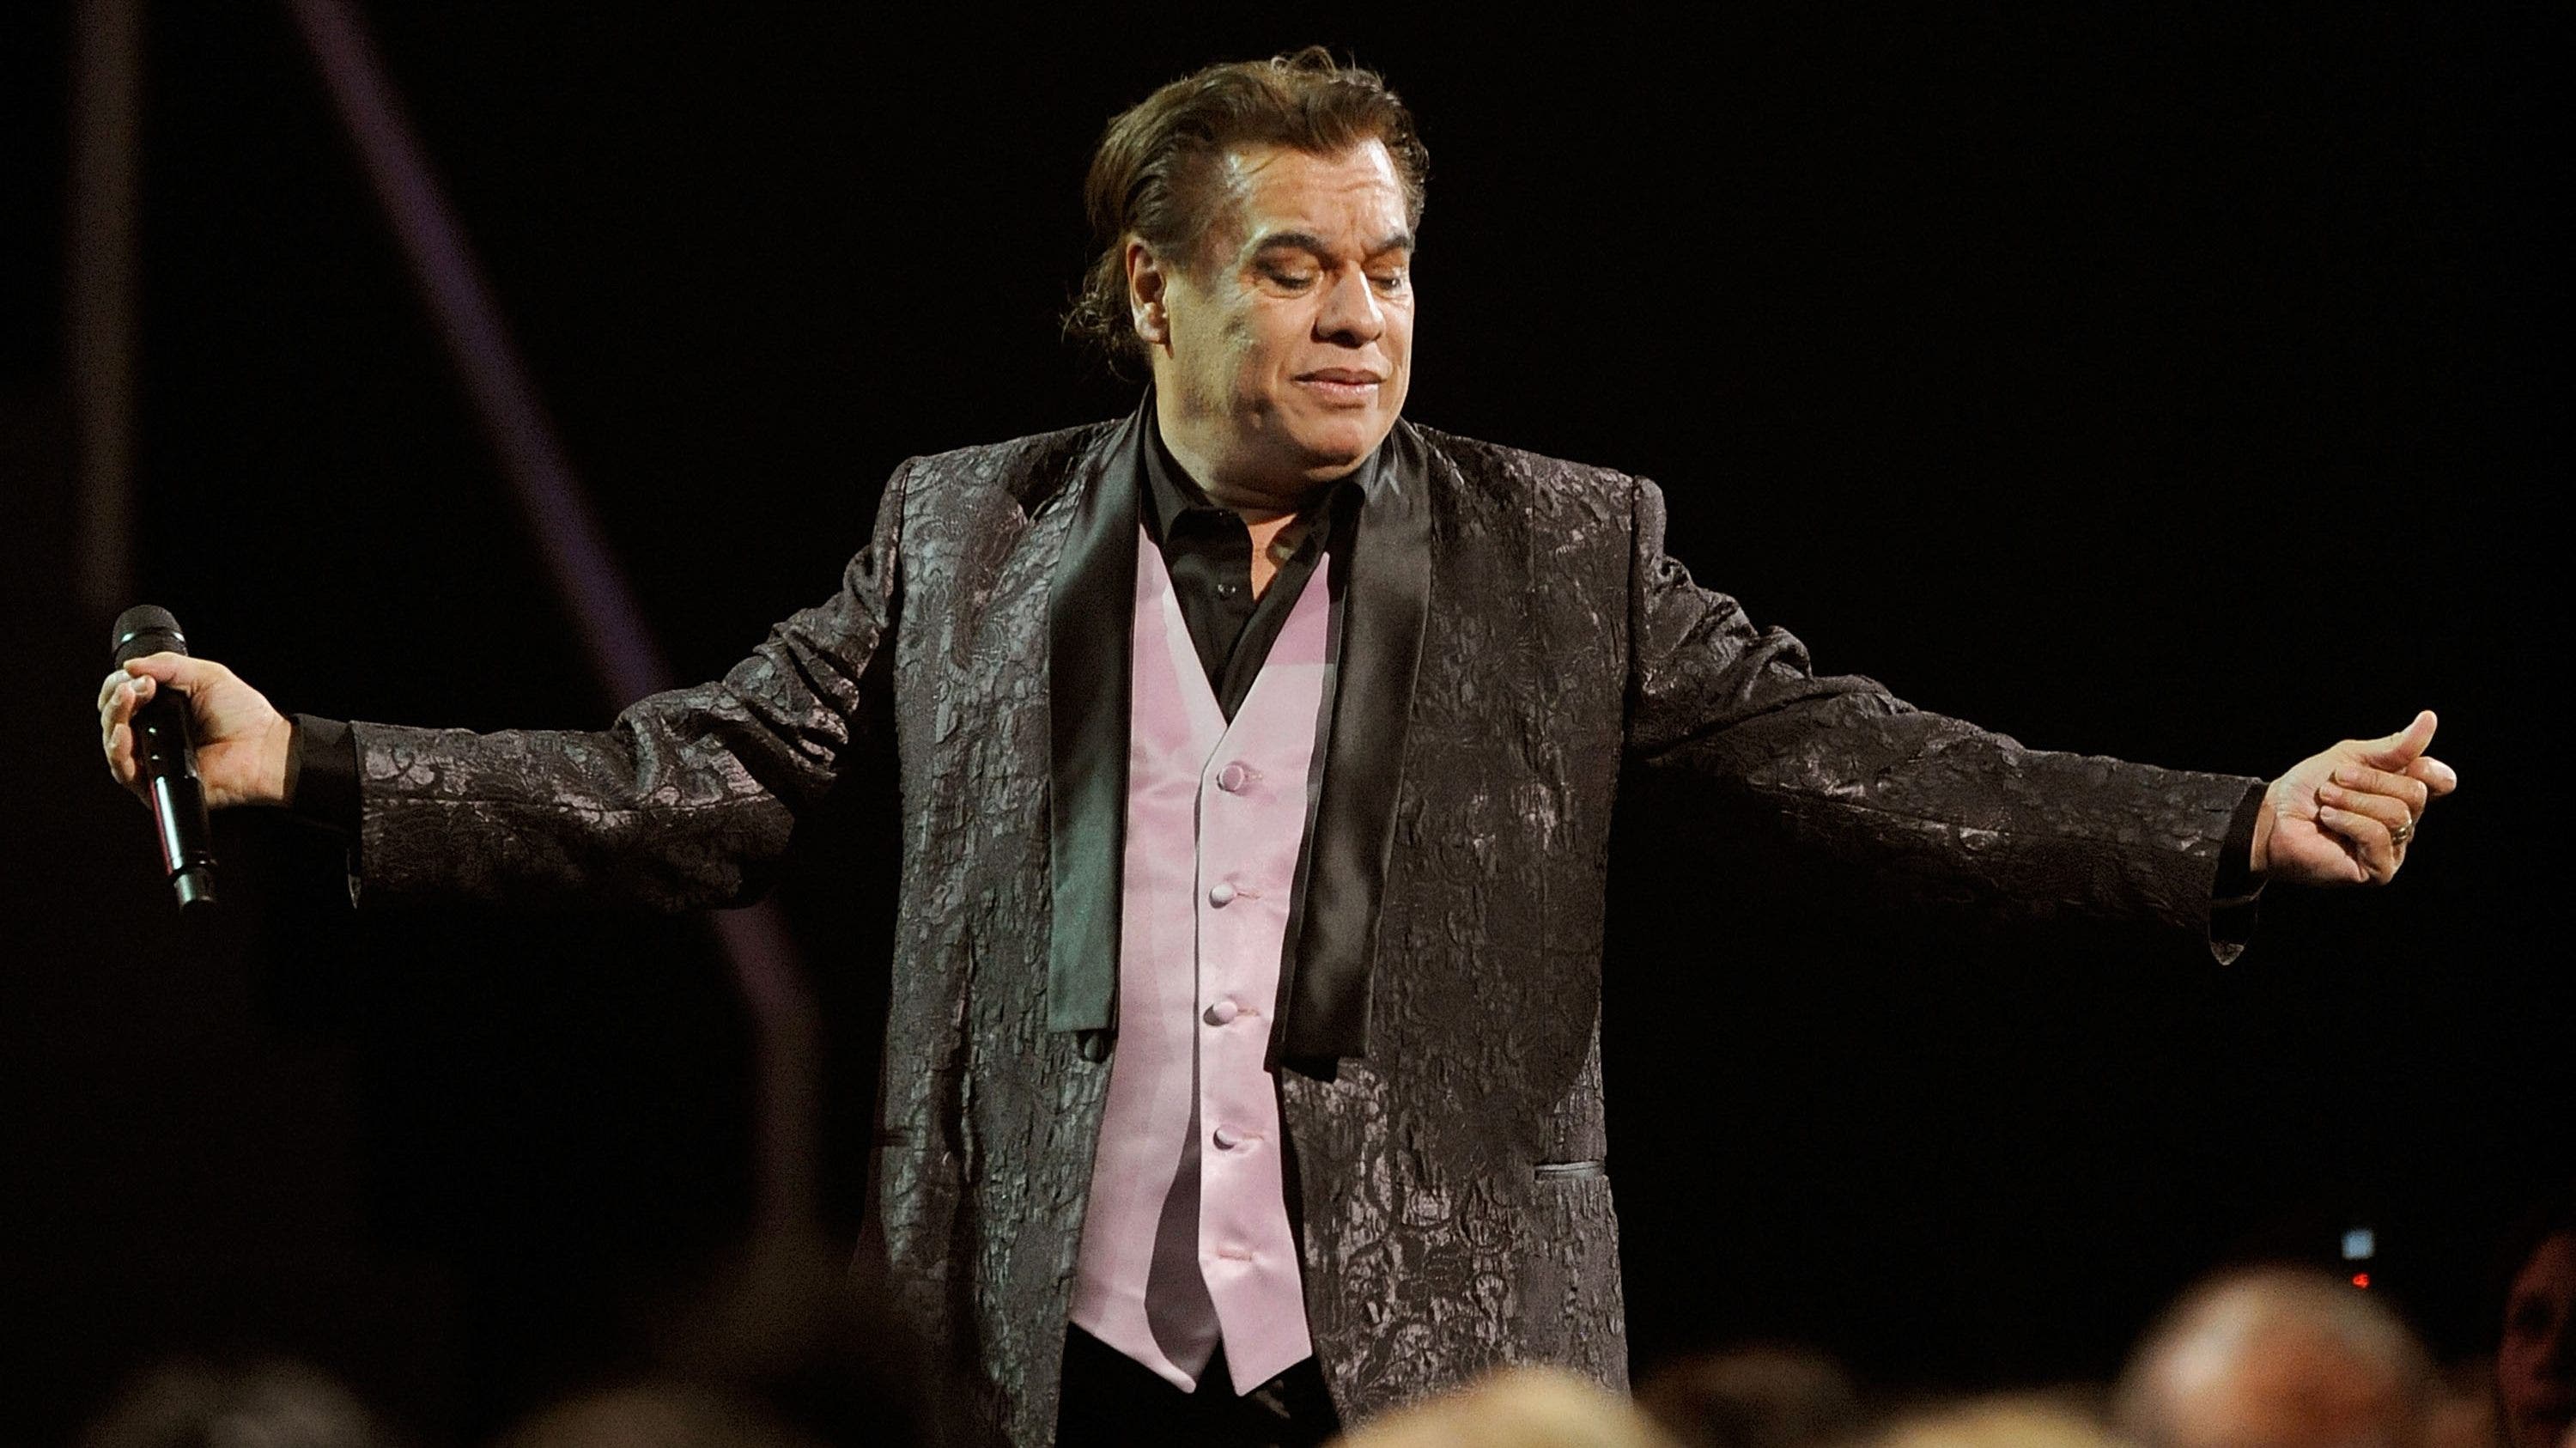 Photos: Juan Gabriel dies at 66 after dazzling the stage for decades